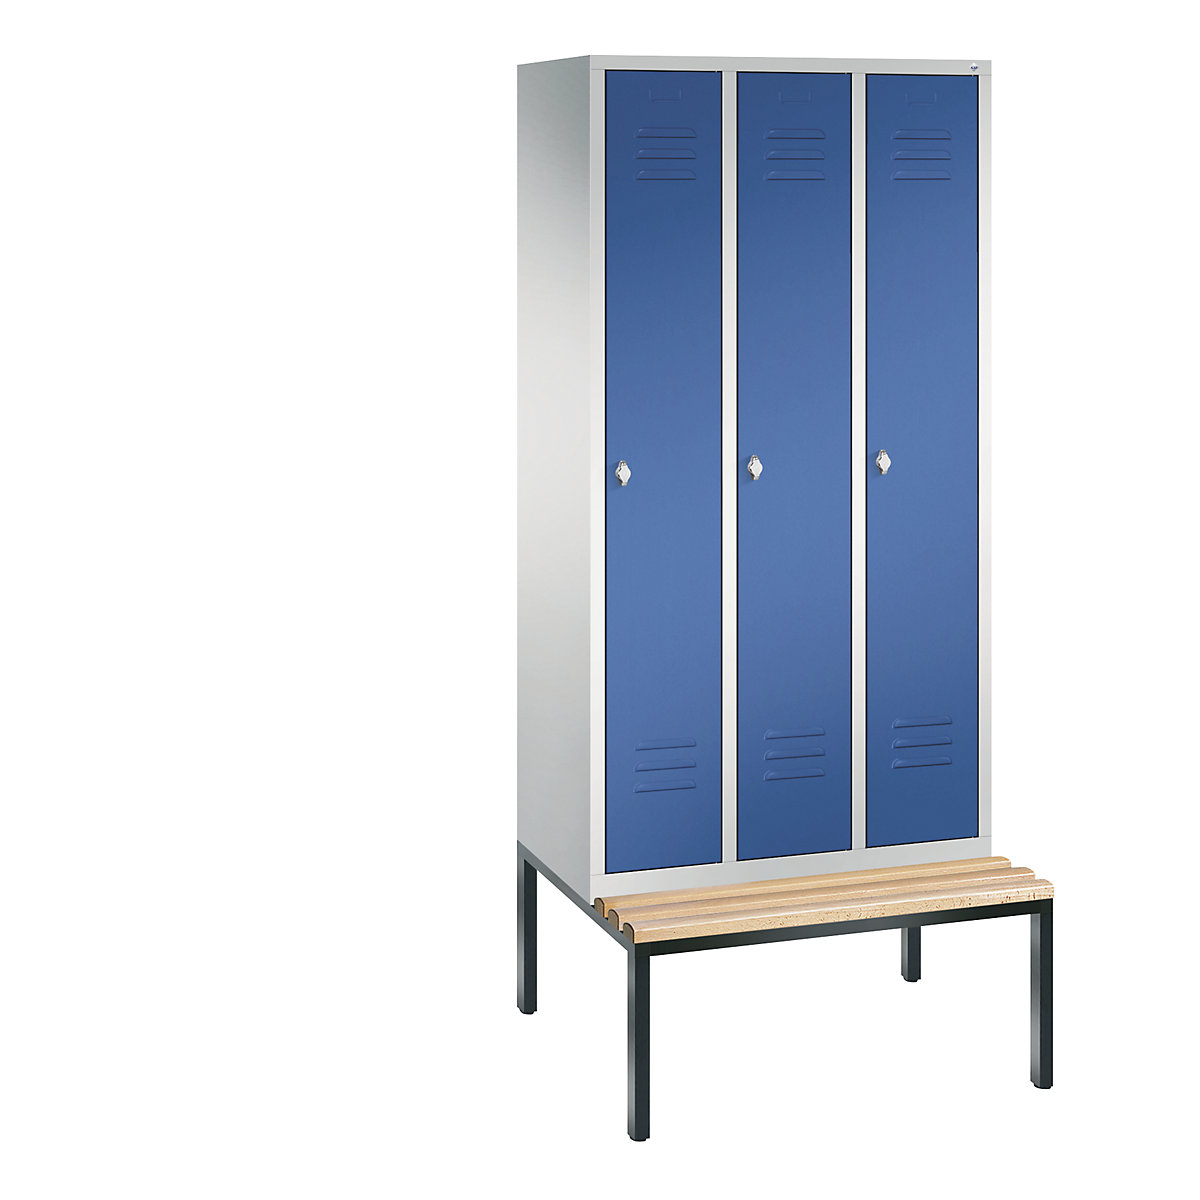 CLASSIC cloakroom locker with bench mounted underneath – C+P